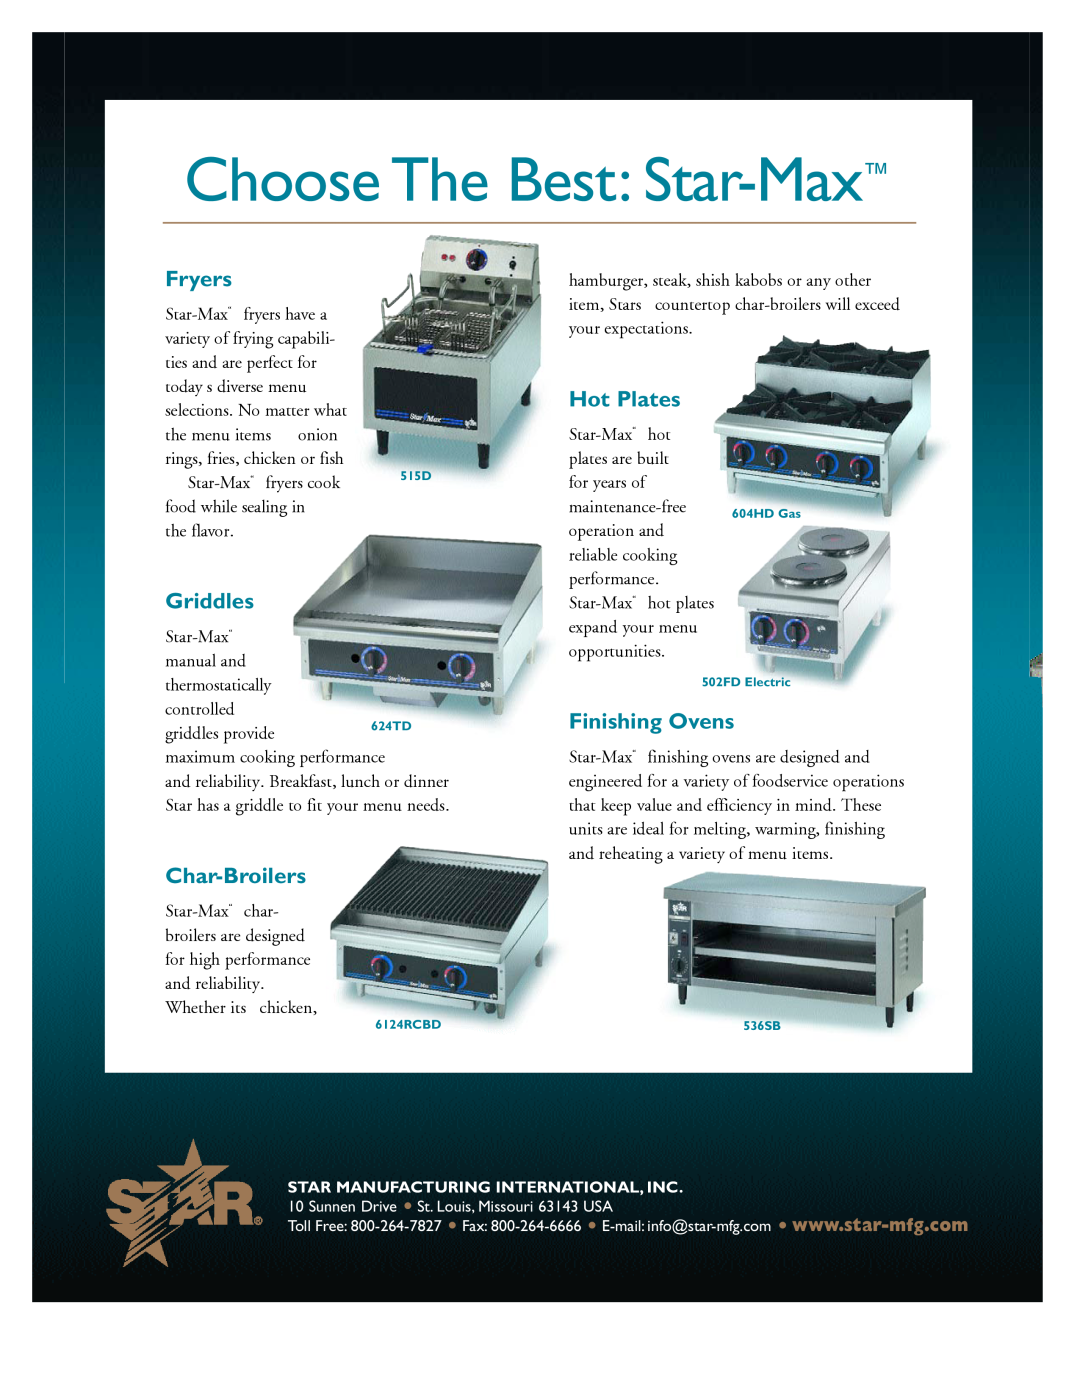 Star Manufacturing Countertop Cooking Equipment Choose The Best Star-Max, Fryers, Griddles, Char-Broilers, Hot Plates 